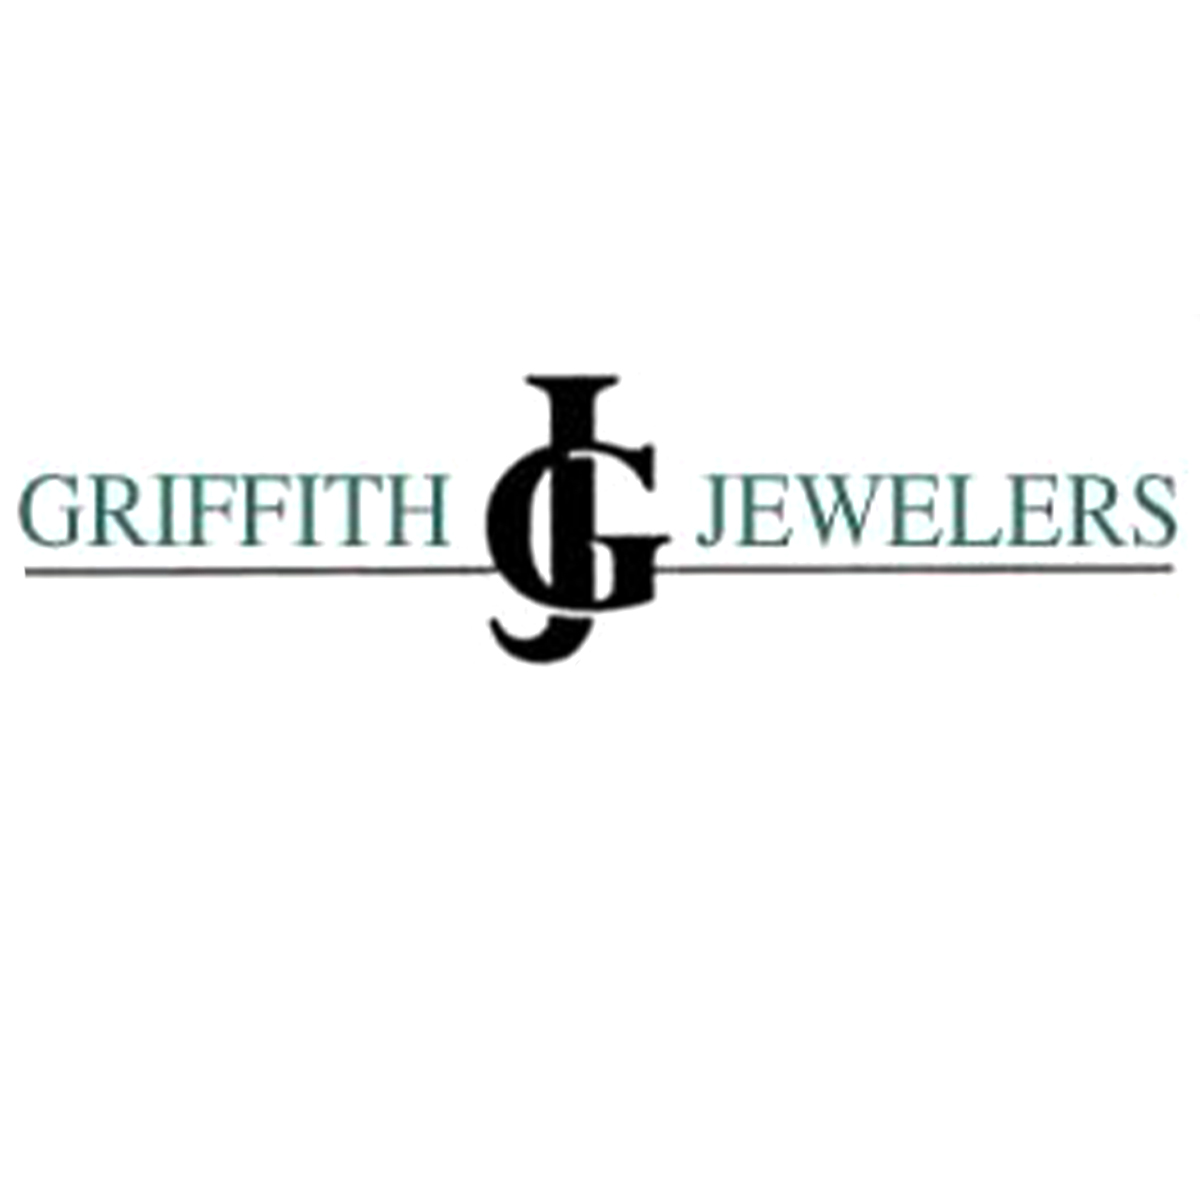 Griffith Jewelers - Griffith, IN